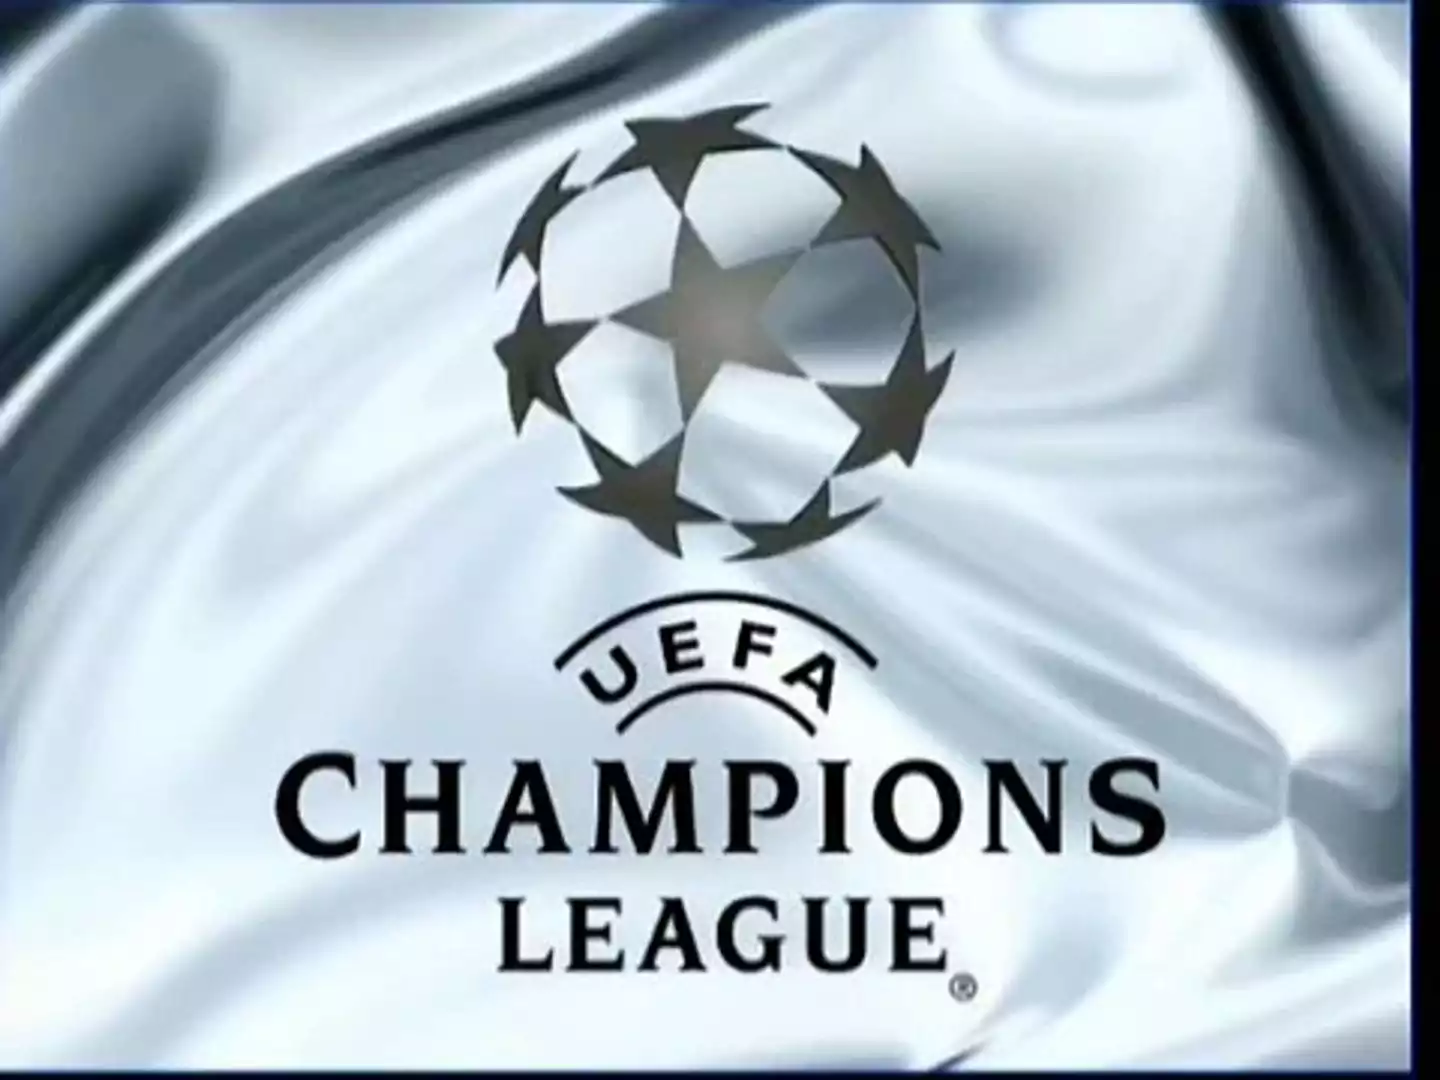 7 Legendary Moments in the UEFA Champions League